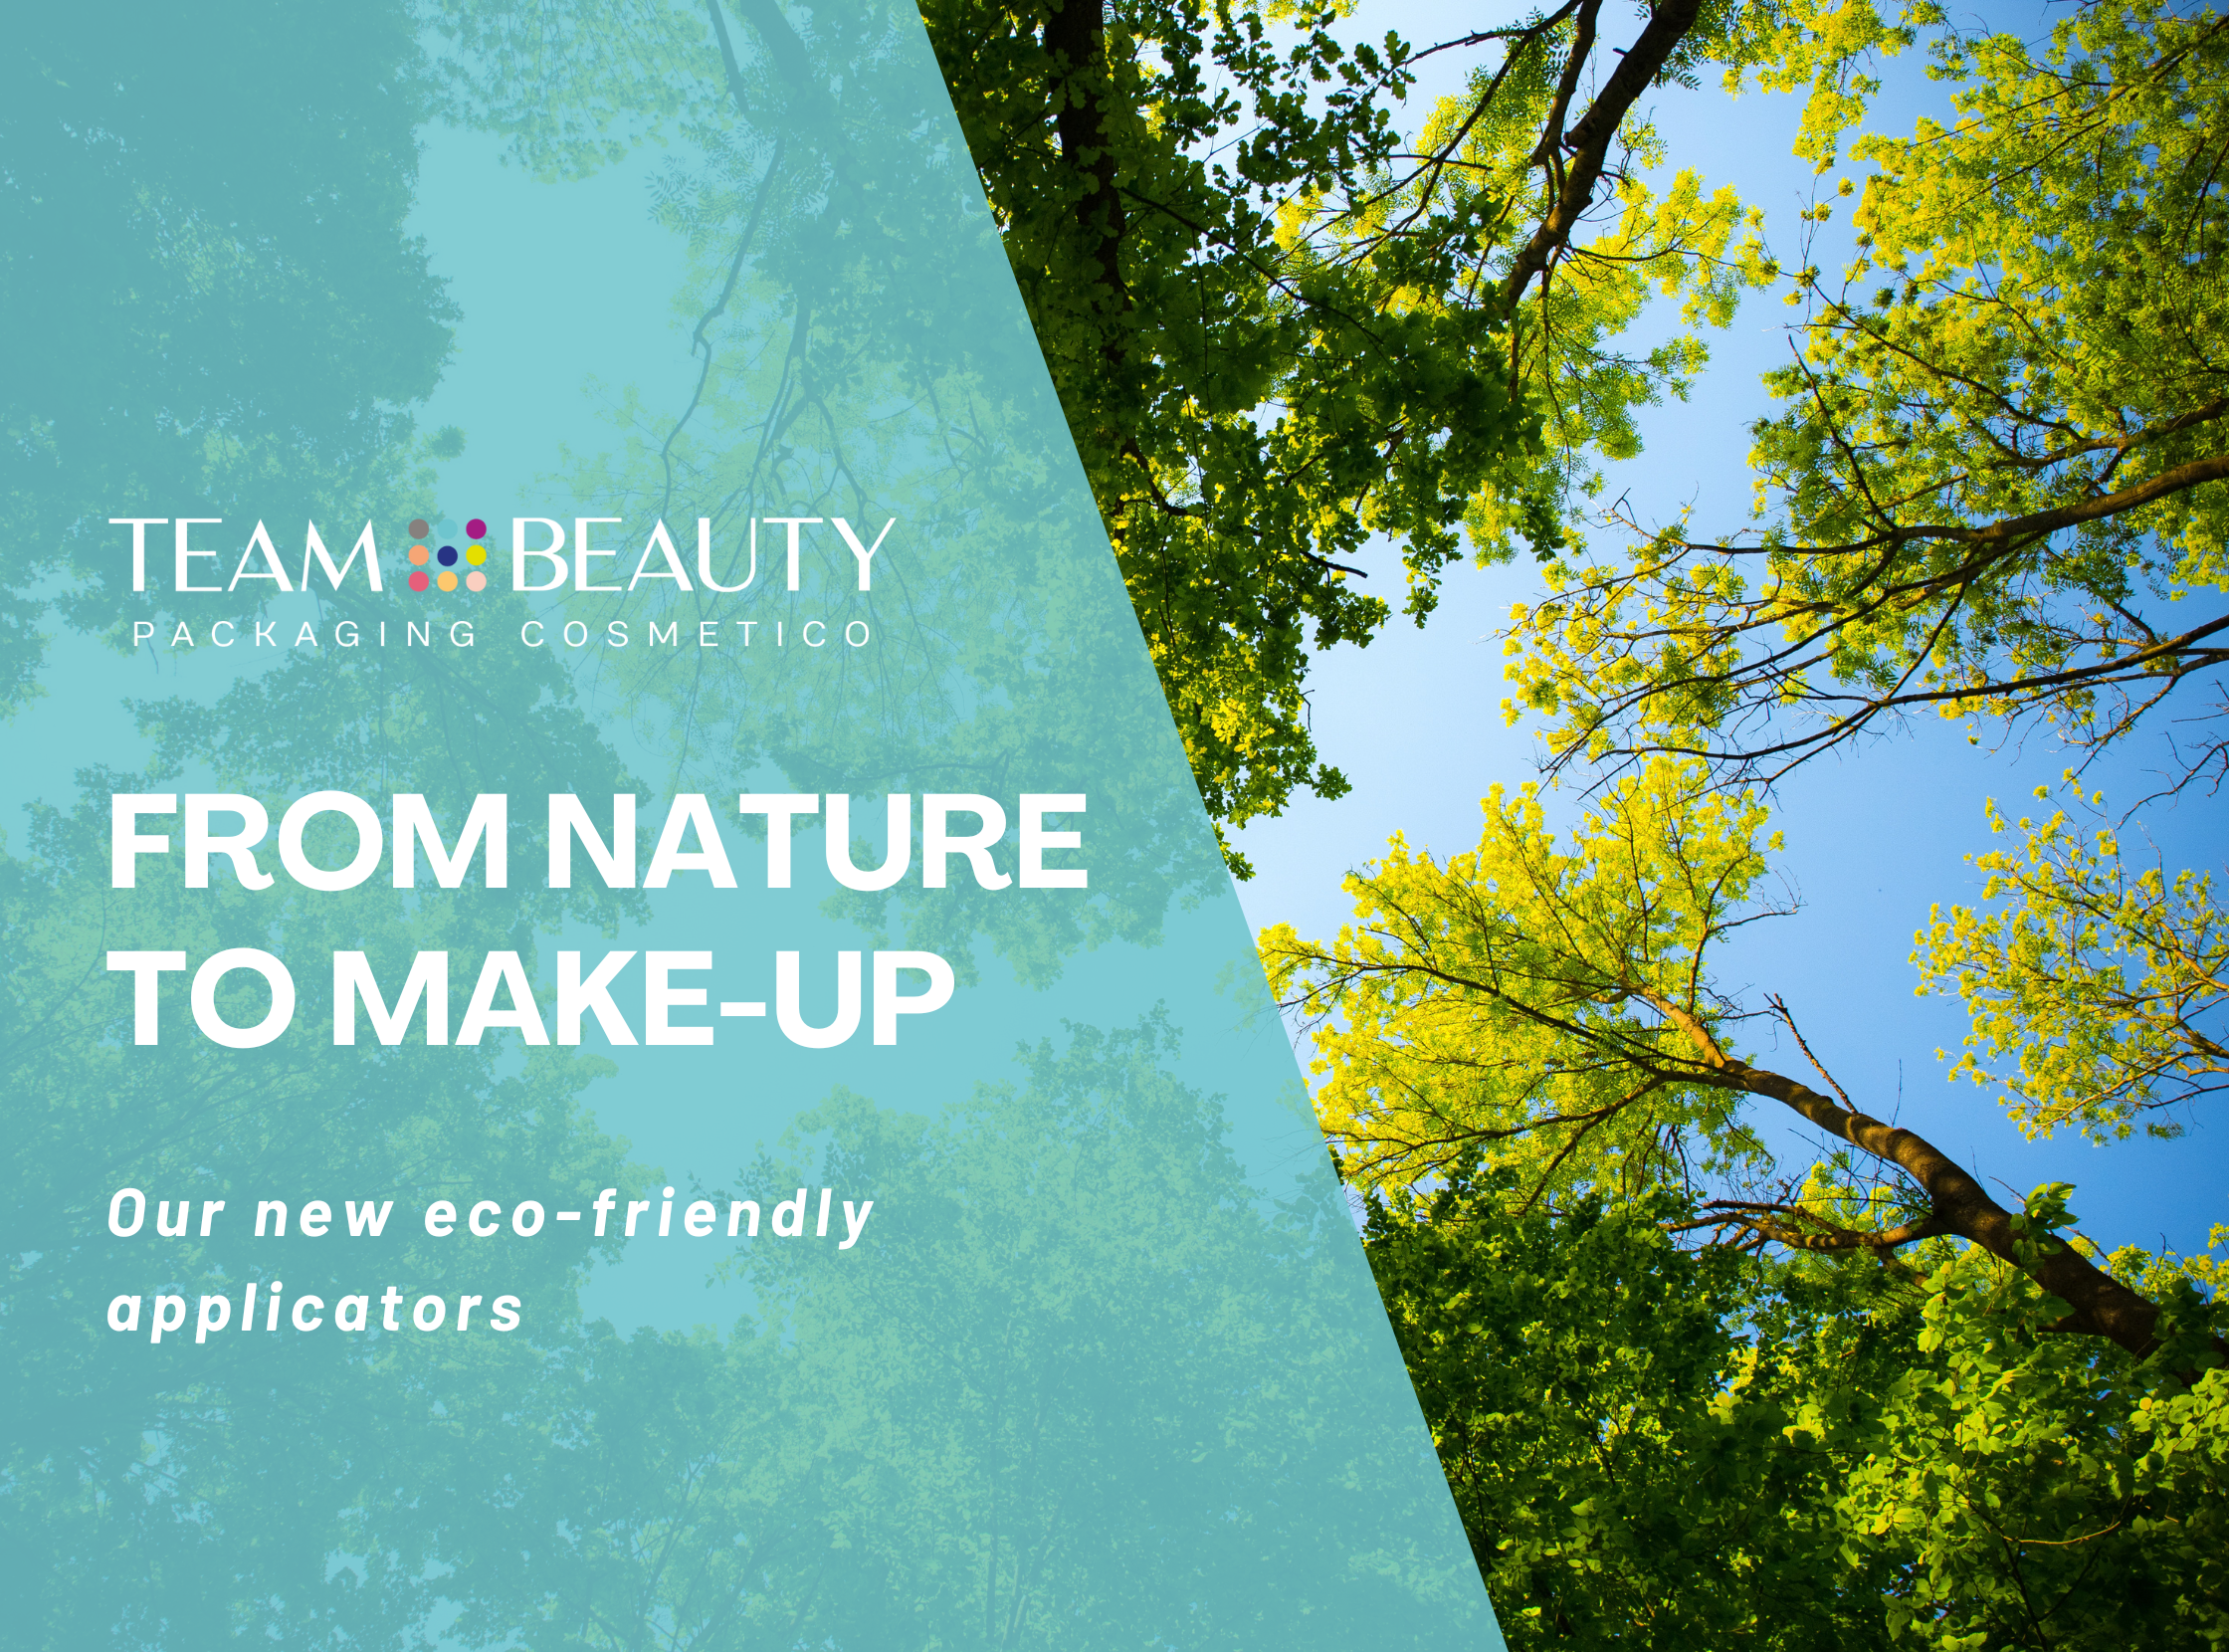 From nature to make-up: our new eco-friendly applicators